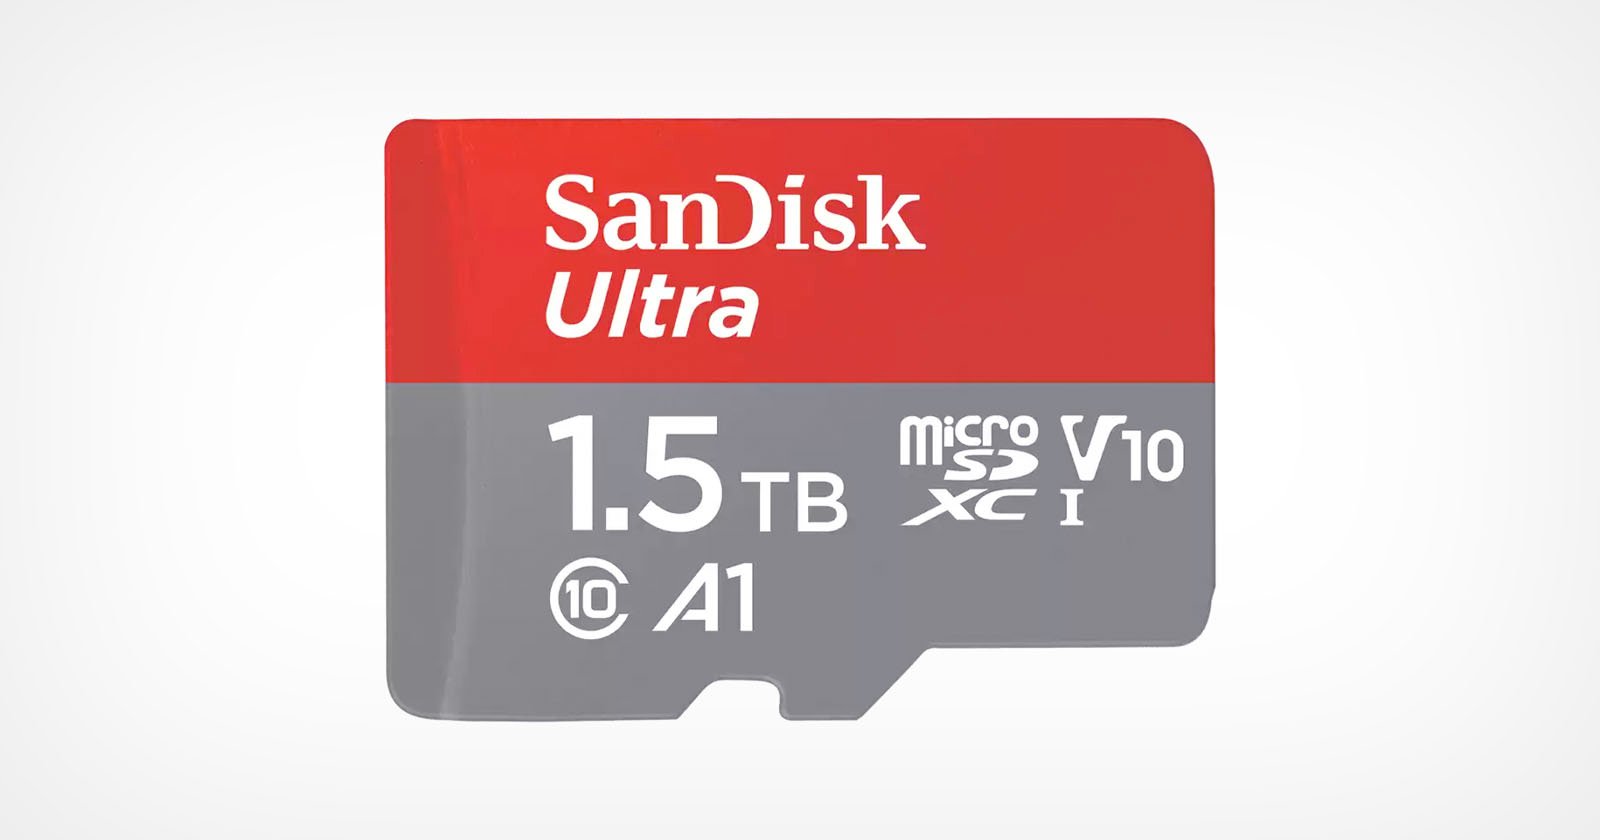 SanDisk Now Makes Worlds Fastest 1.5TB High-Capacity microSD Card